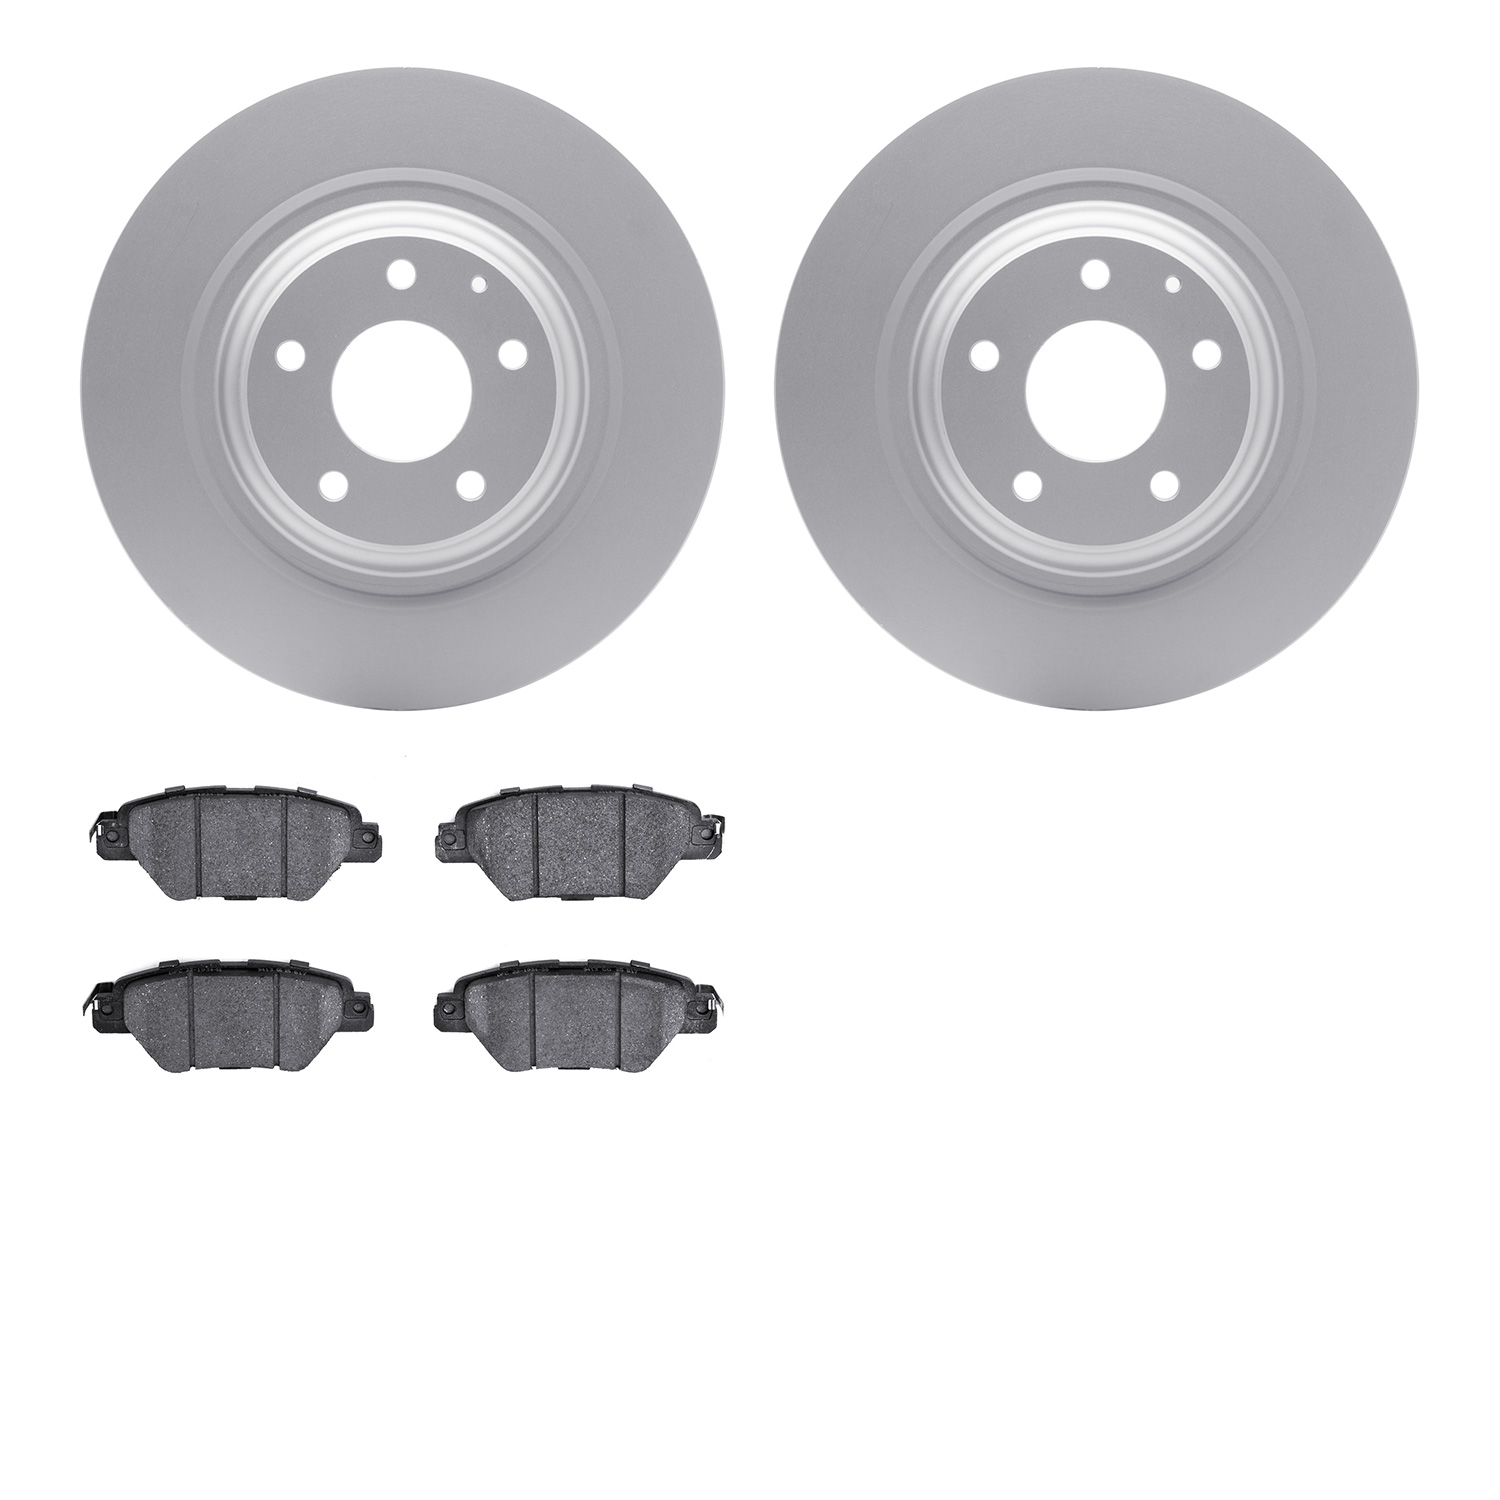 4302-80046 Geospec Brake Rotors with 3000-Series Ceramic Brake Pads Kit, Fits Select Ford/Lincoln/Mercury/Mazda, Position: Rear